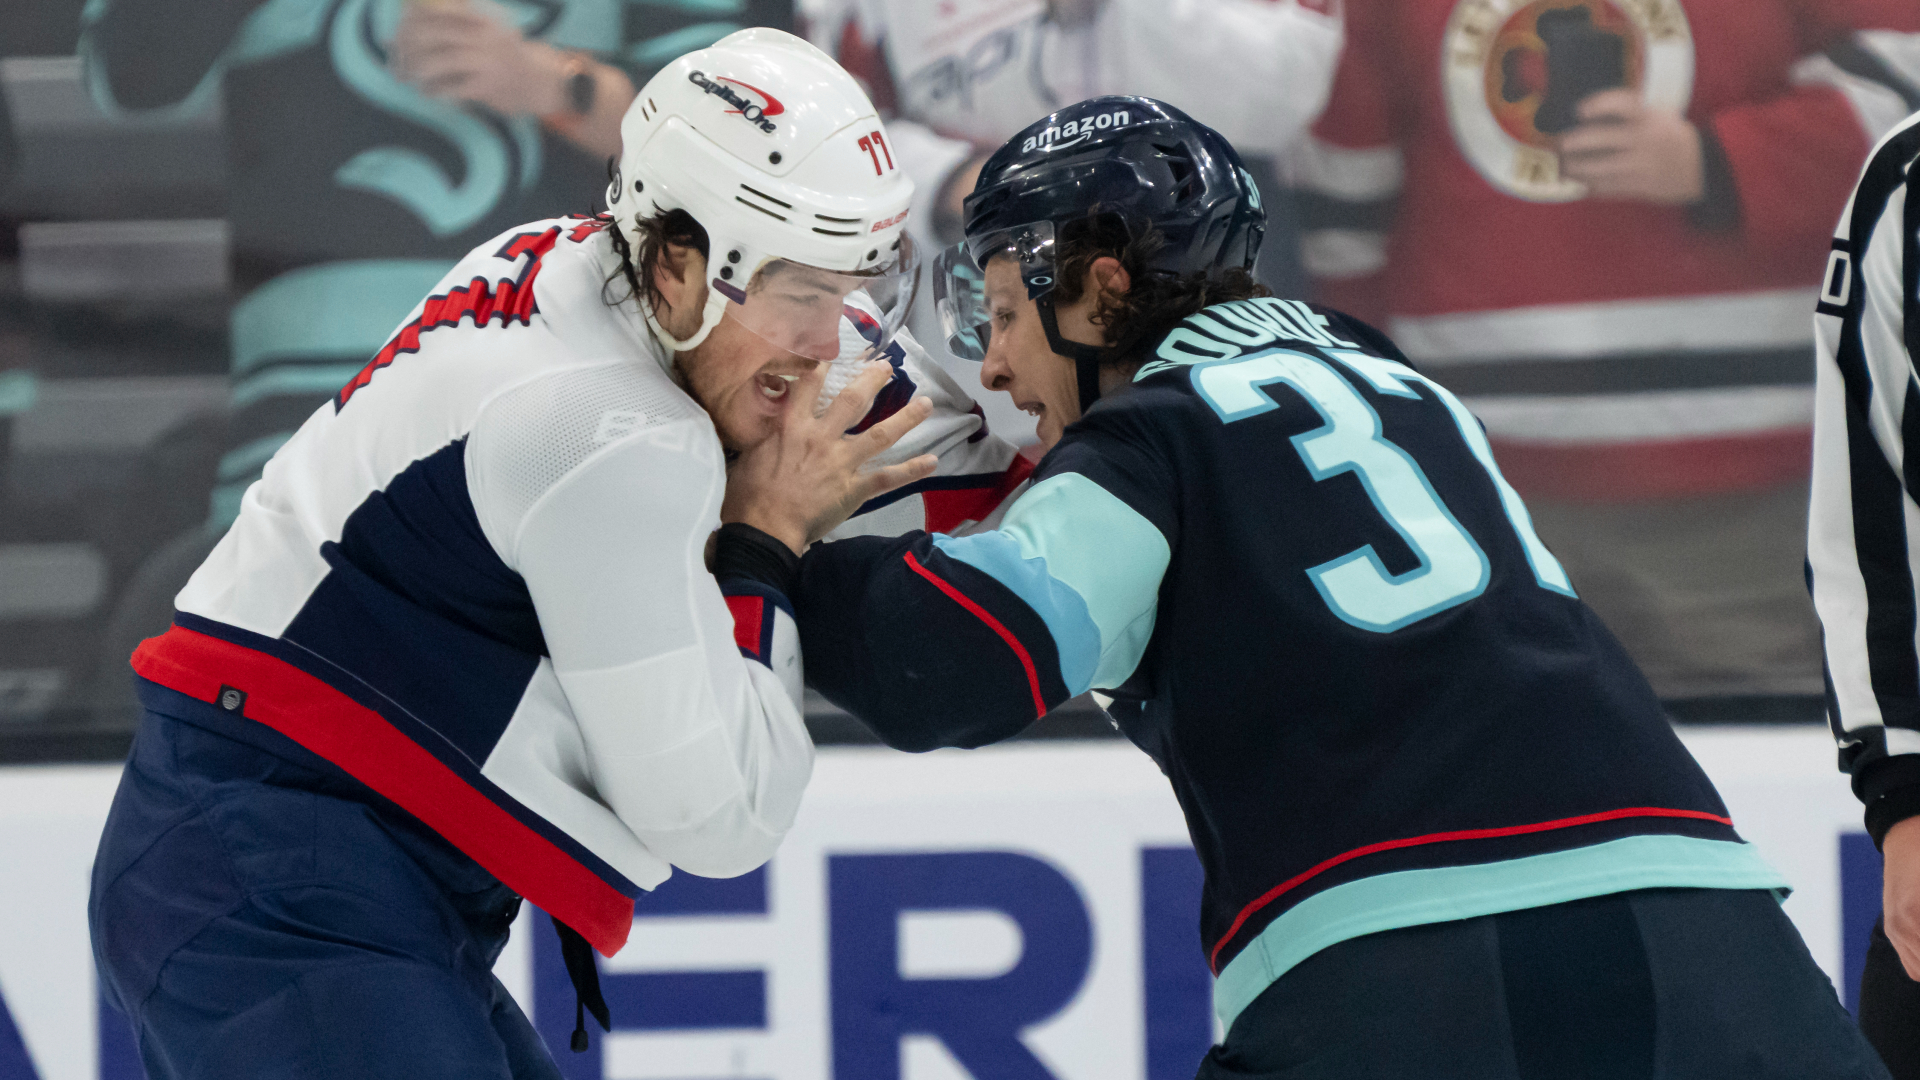 Capitals forward T.J. Oshie and Kraken forward Yanni Gourde fight during the first period at Climate Pledge Arena